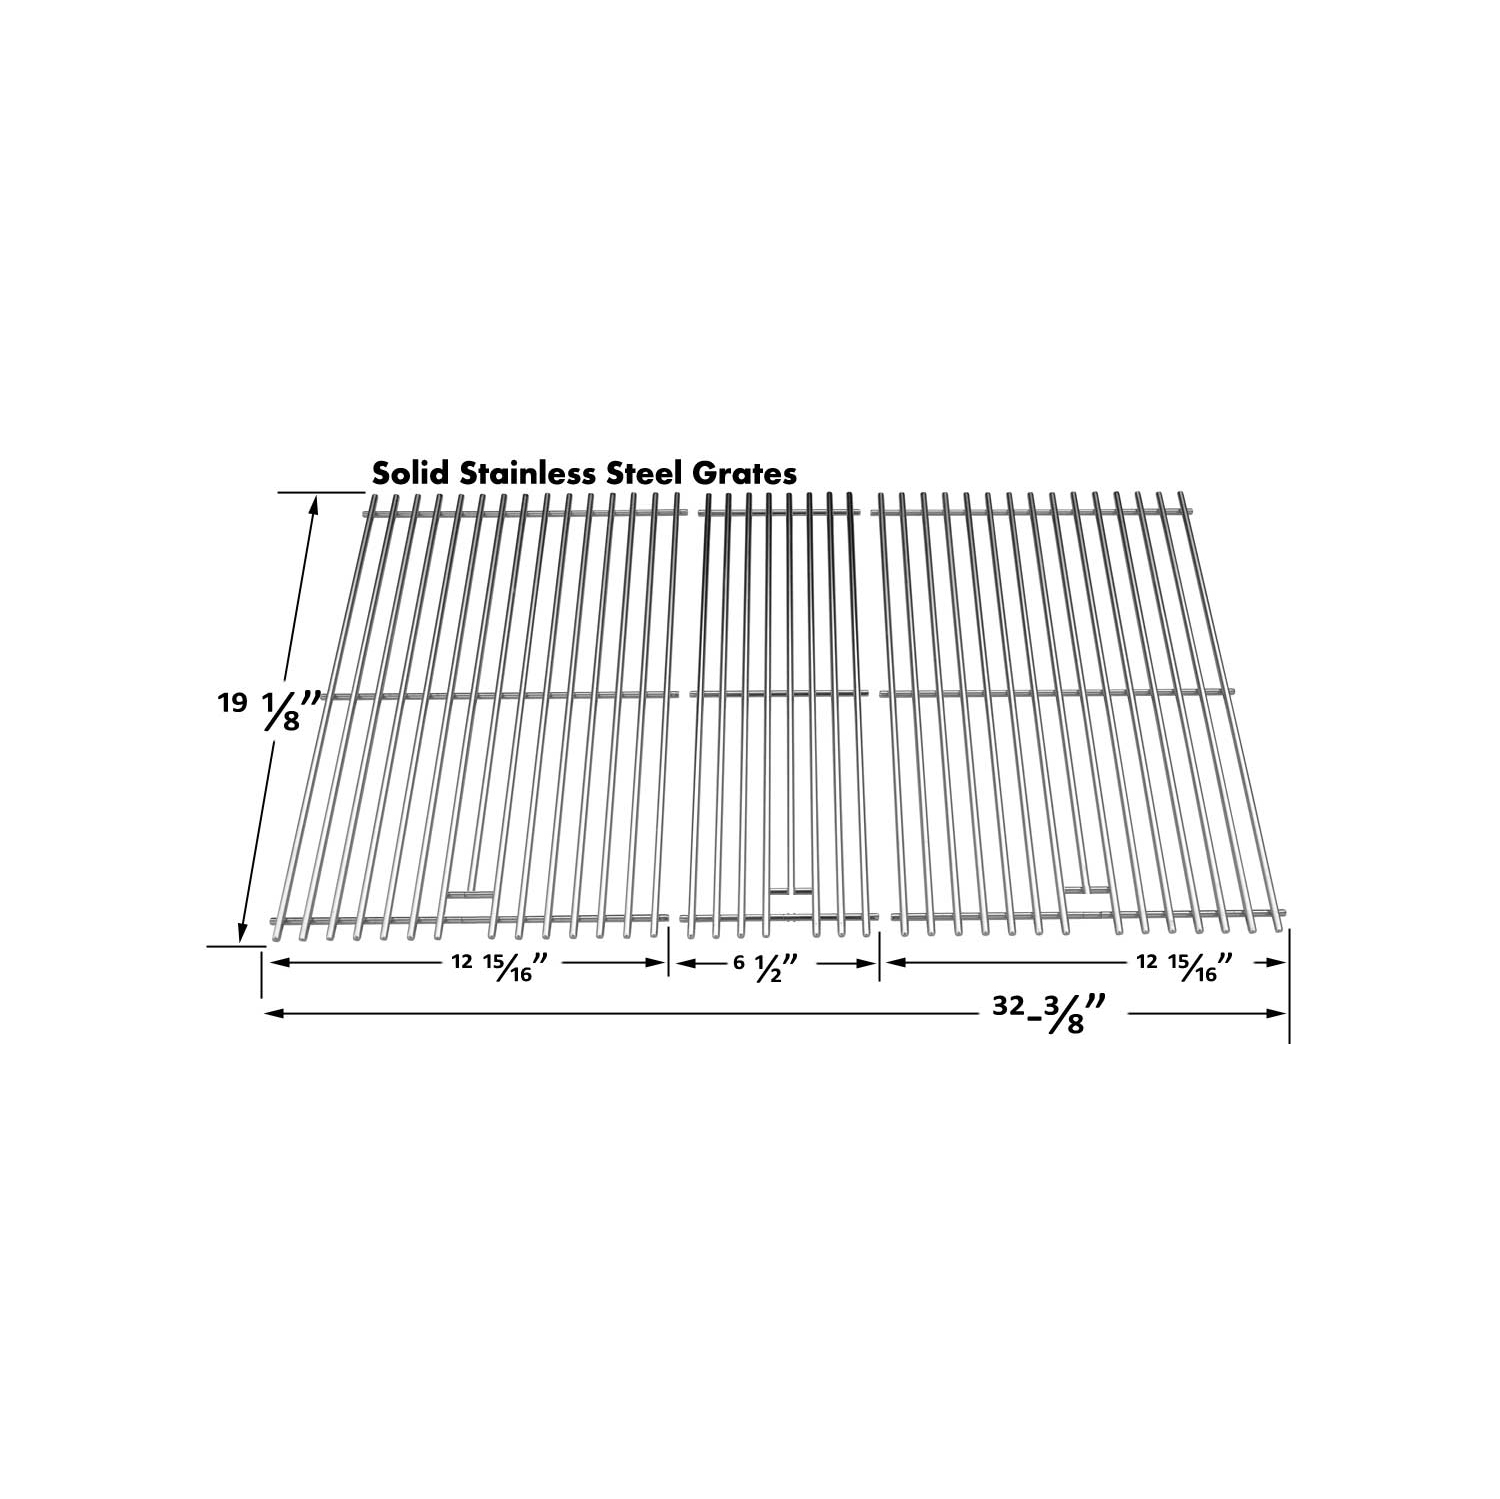 Stainless Cooking Grids for Master Forge 288994, Kenmore, Kirkland, Members Mark, Grand Cafe cg108alp, Set of 3